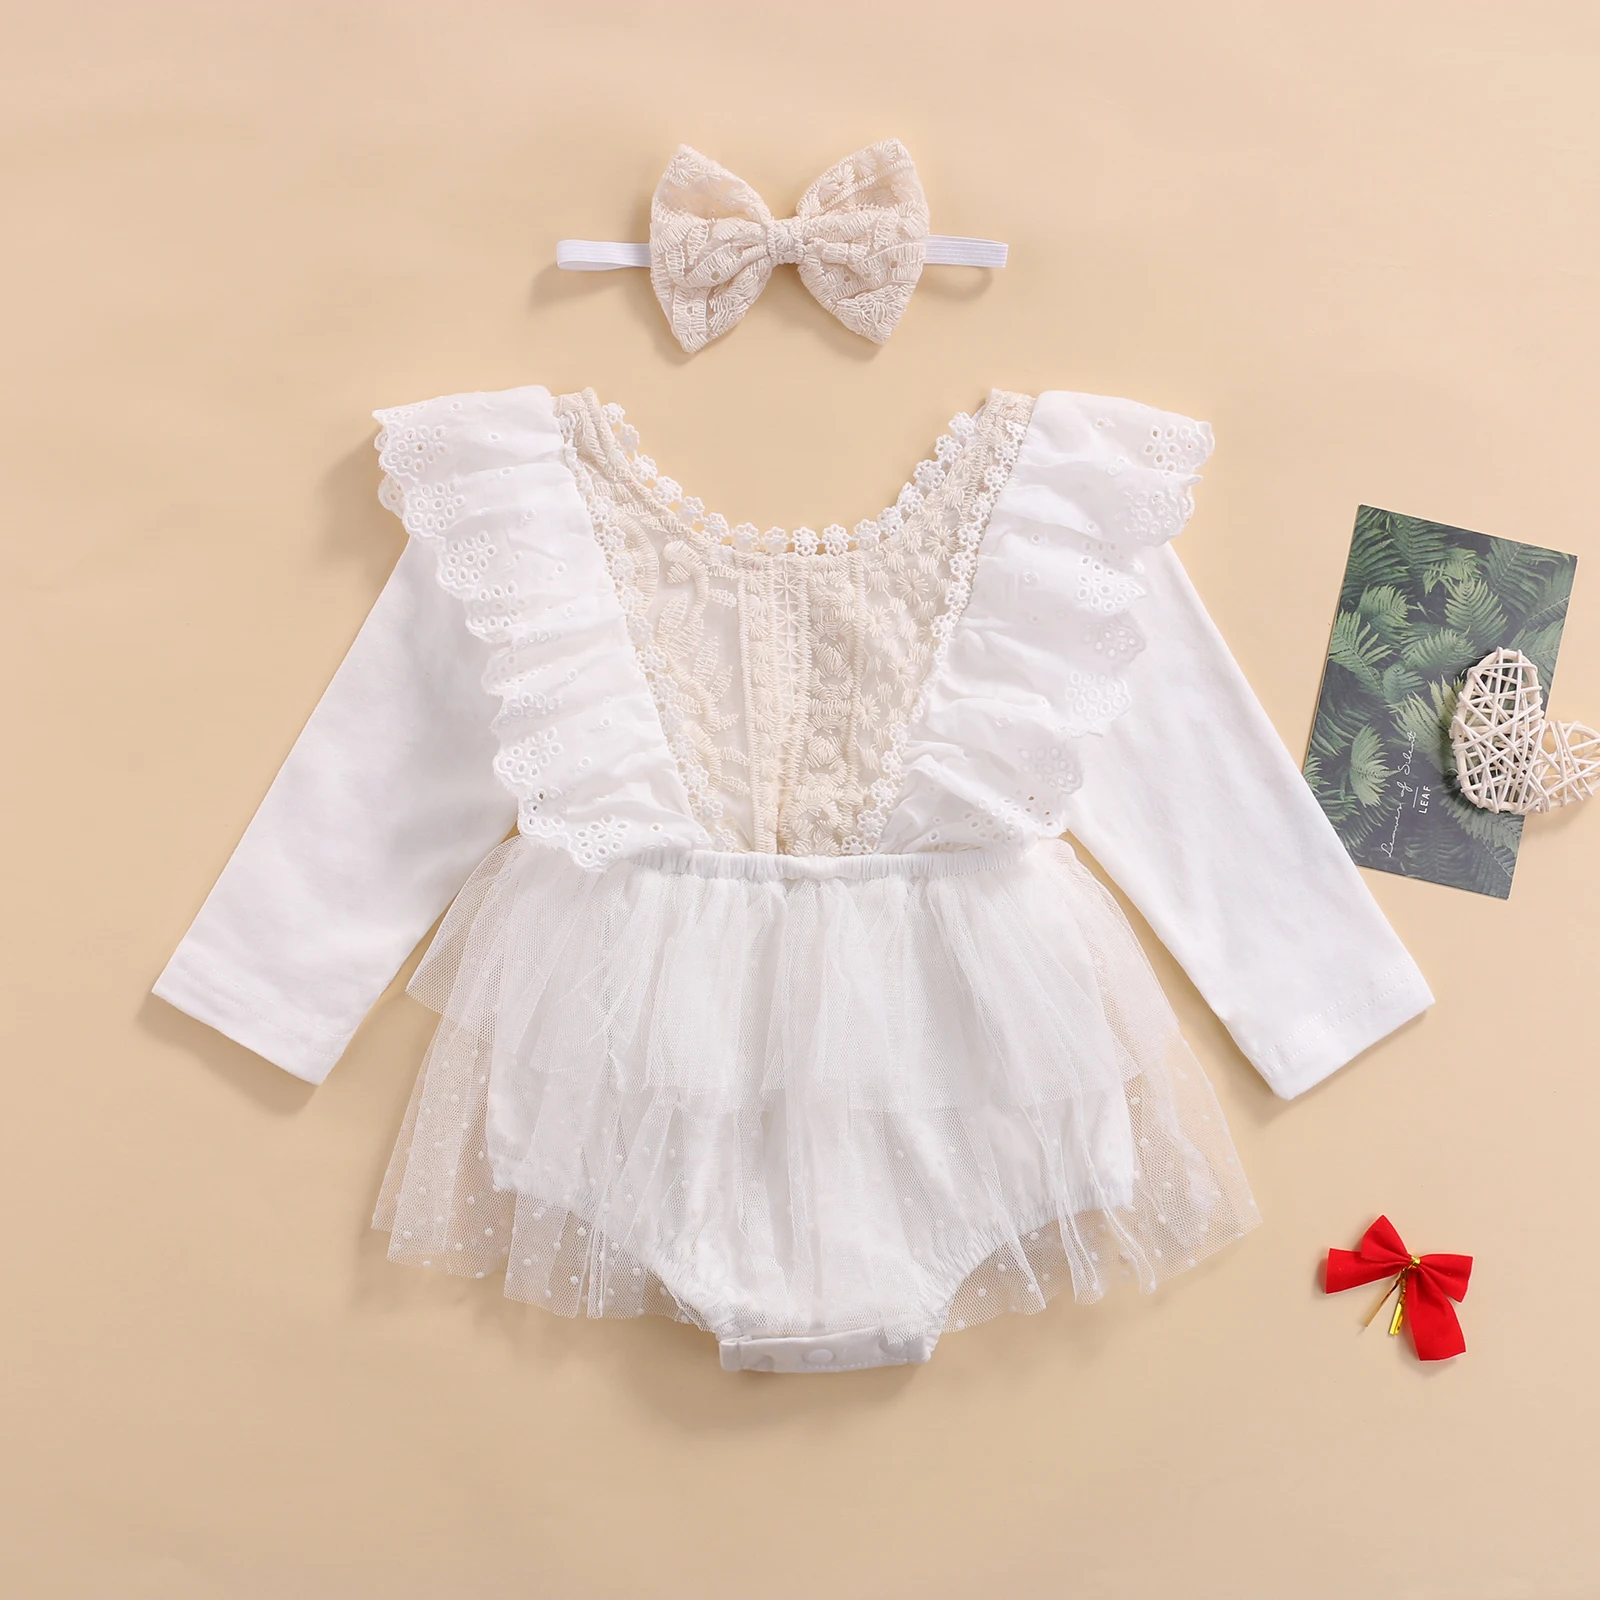 Cotton baby suit 0-18M Newborn Kid Baby Girl Clothes Ruffle Lace V-neck Romper Tutu Dress Long Sleeve Jumpsuit + Headband Princess Party Outfits Baby Bodysuits made from viscose 